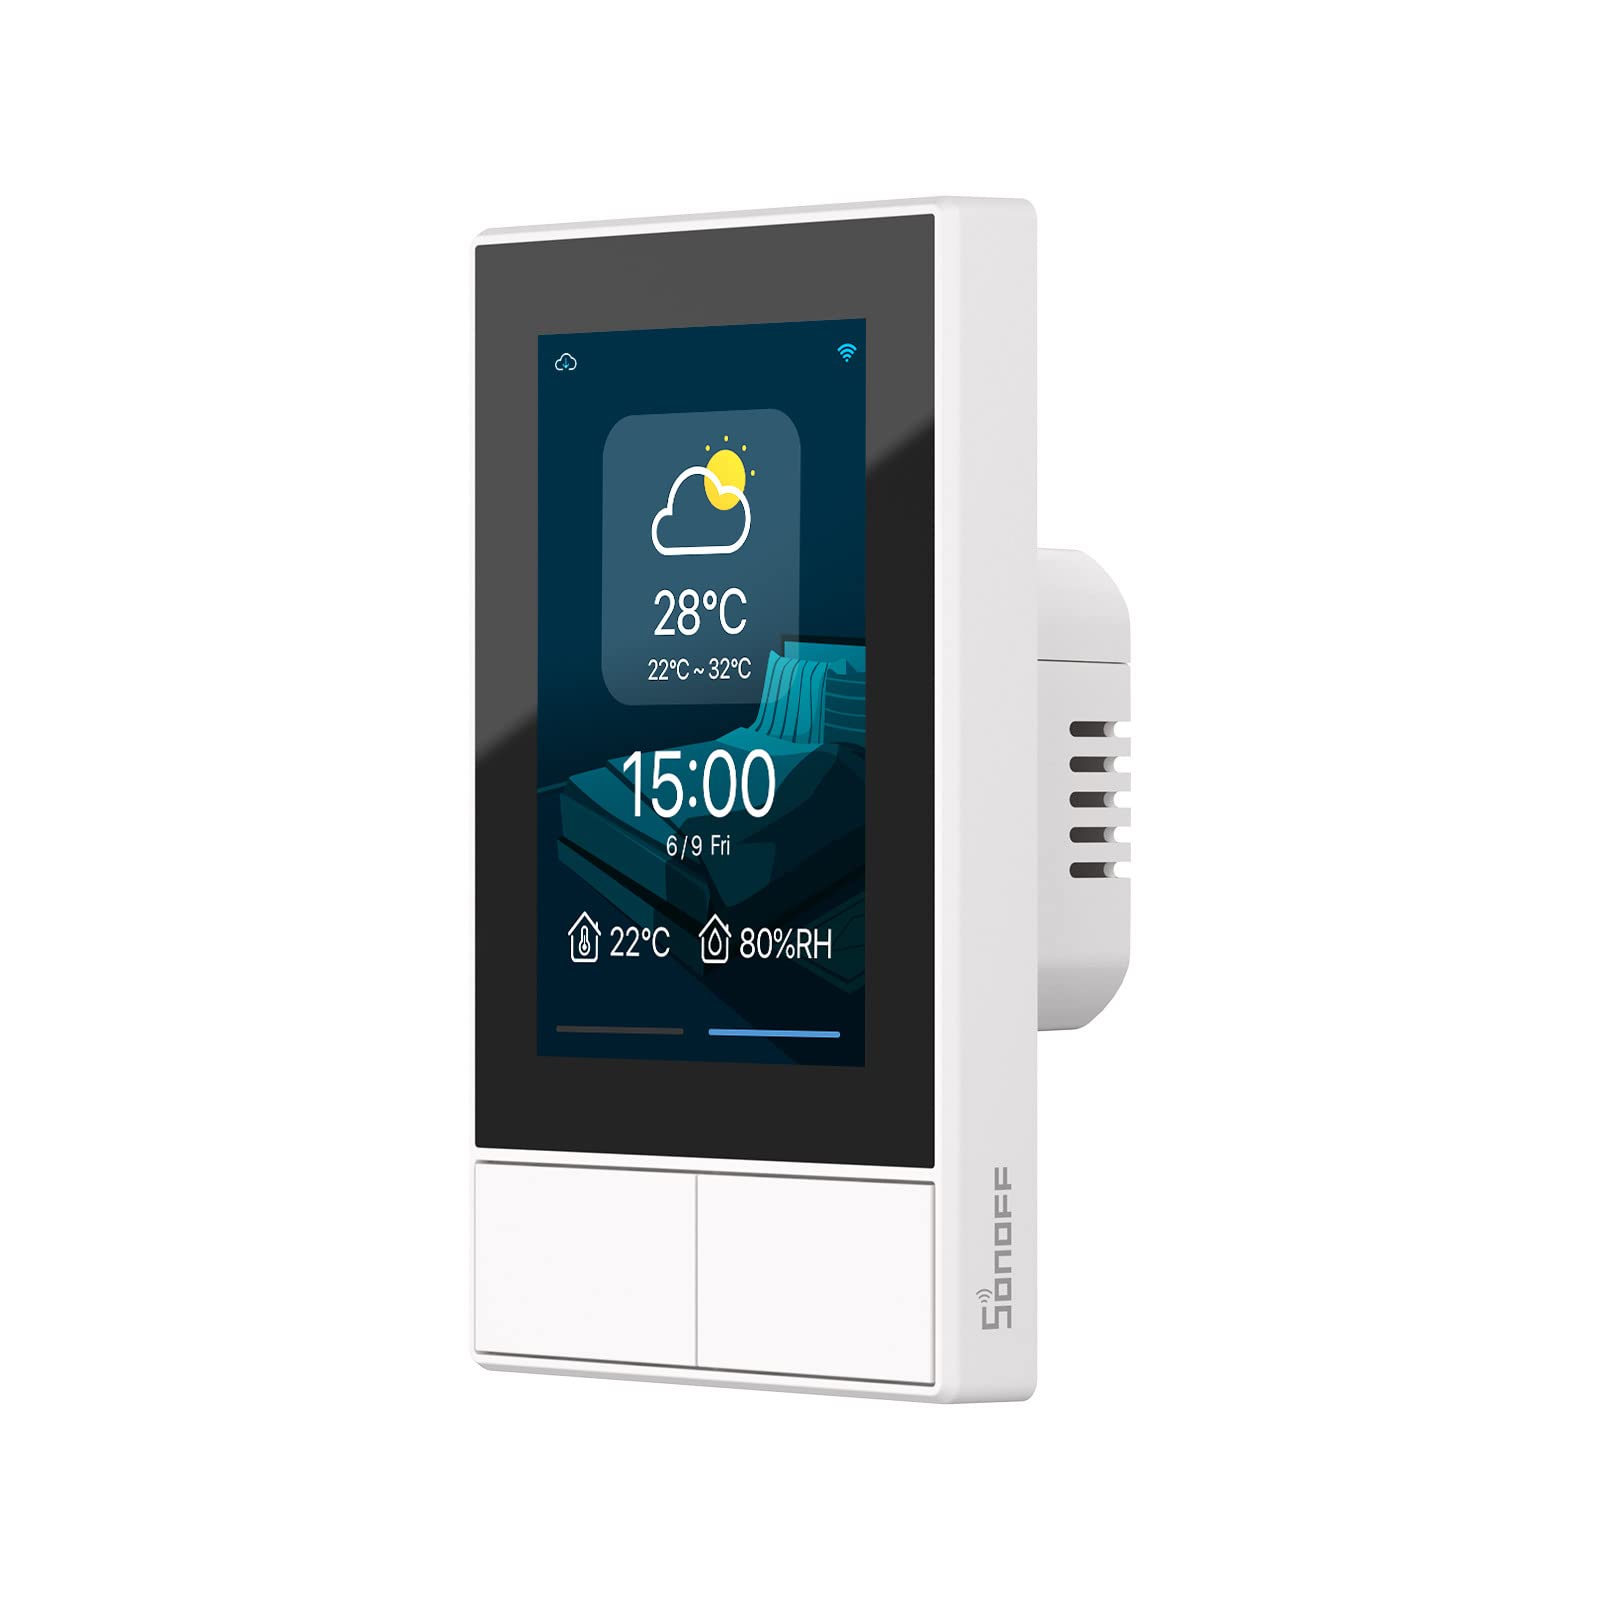 How to Control Your Home on SONOFF NSPanel Smart Scene Wall Switch? - SONOFF  Official